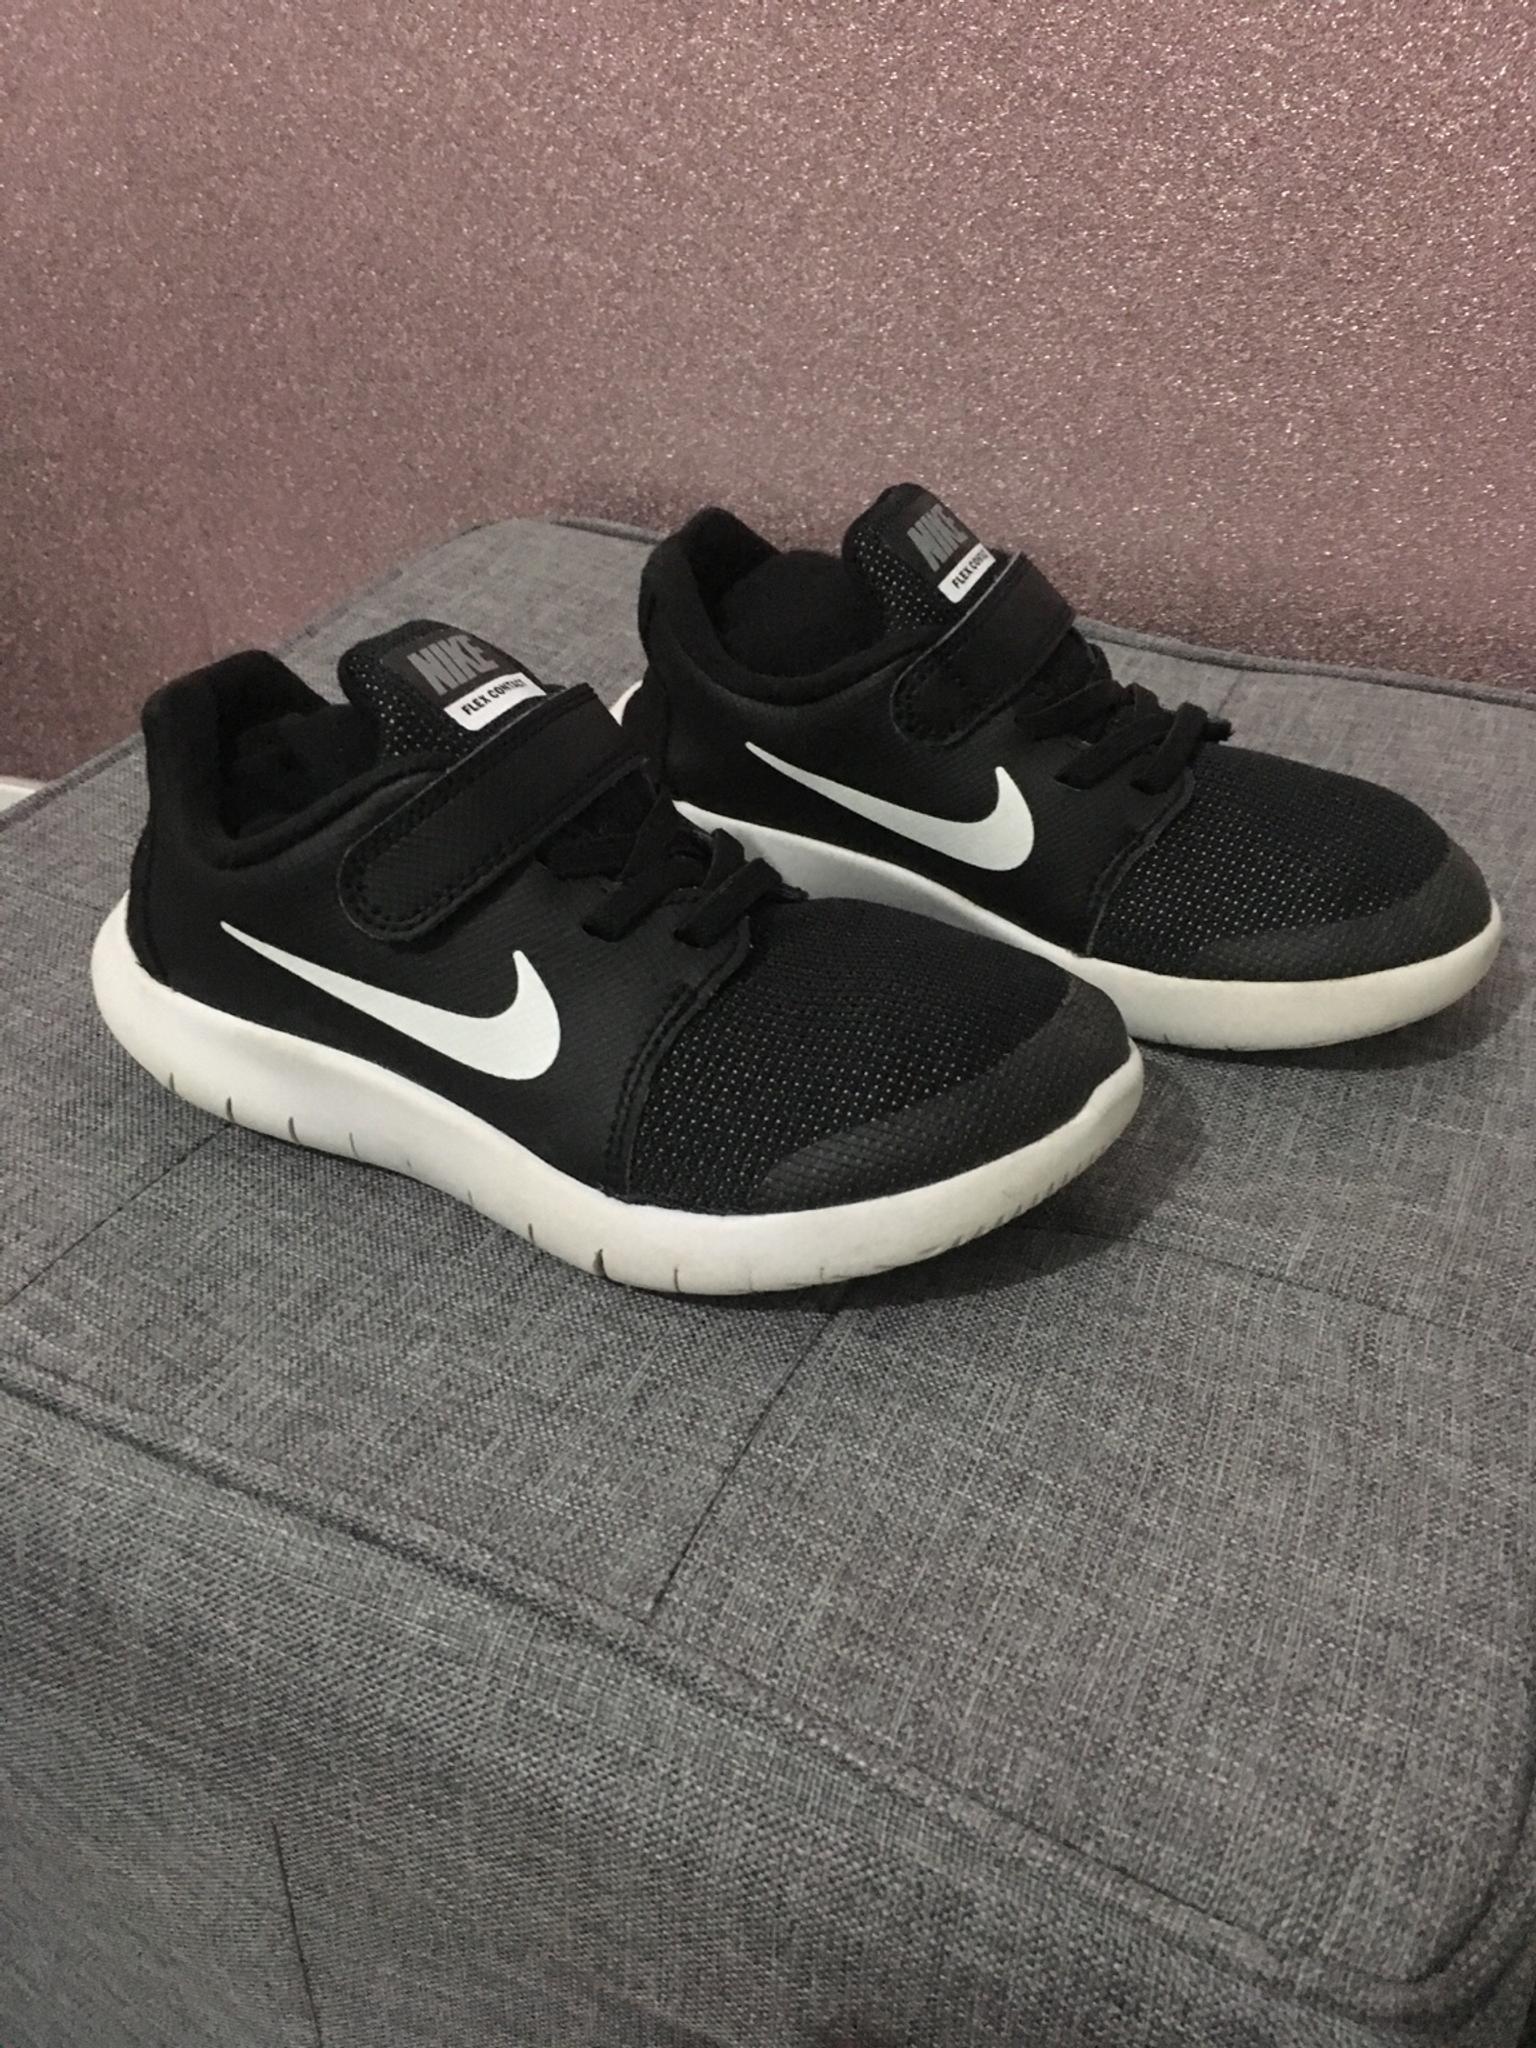 nike black shoes with white sole 